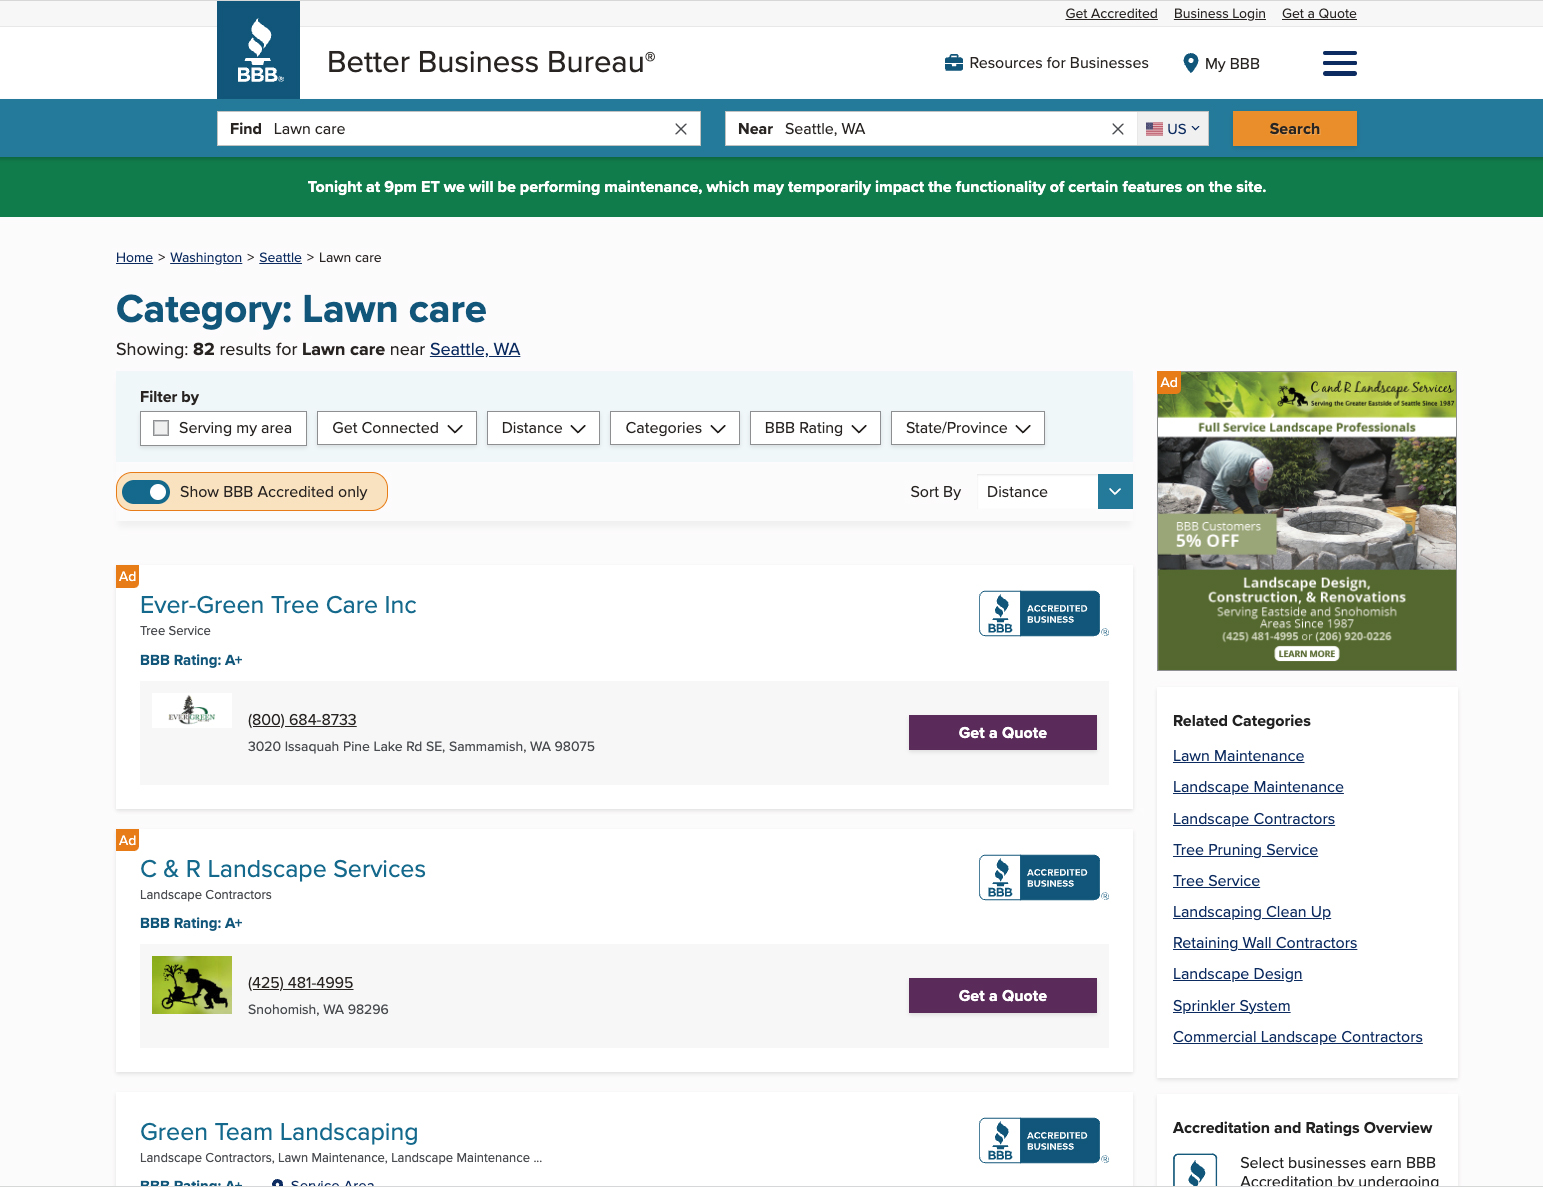 A screenshot of the local BBB listings for lawn care in Seattle, Washington.